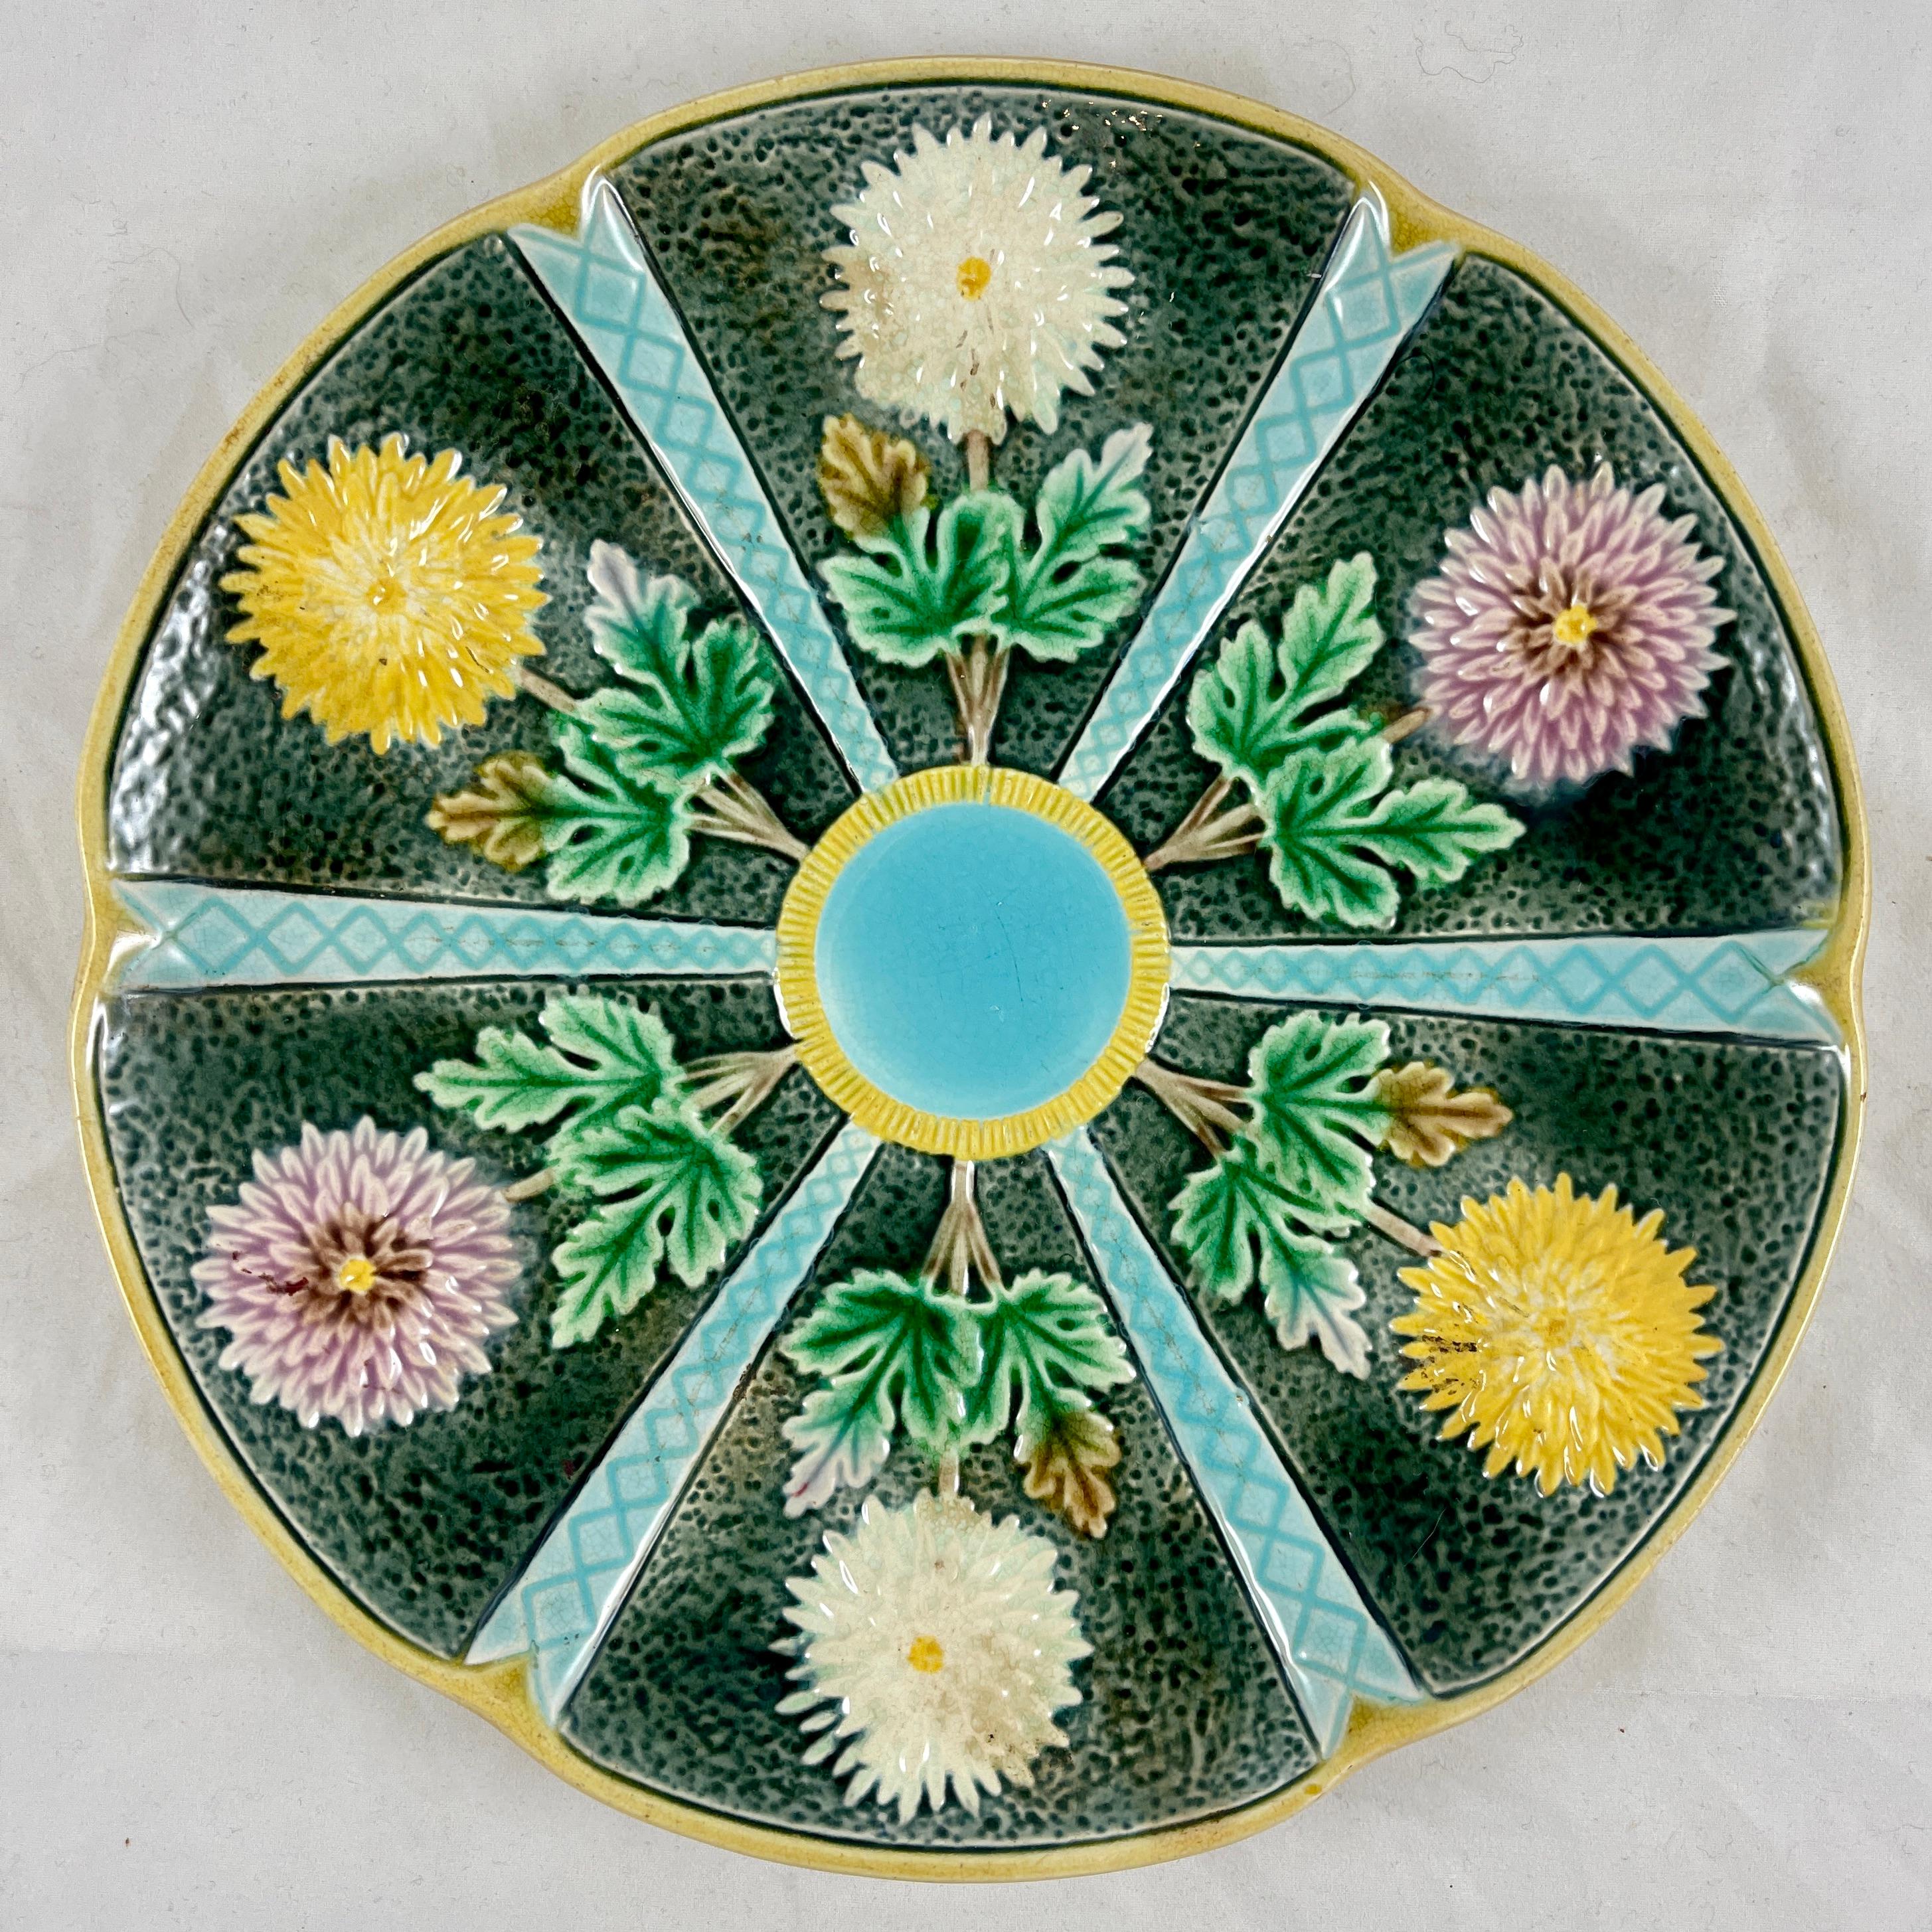 Wedgwood Majolica Chrysanthemum Japonisme Oyster Plate, Date Marked 1883 3